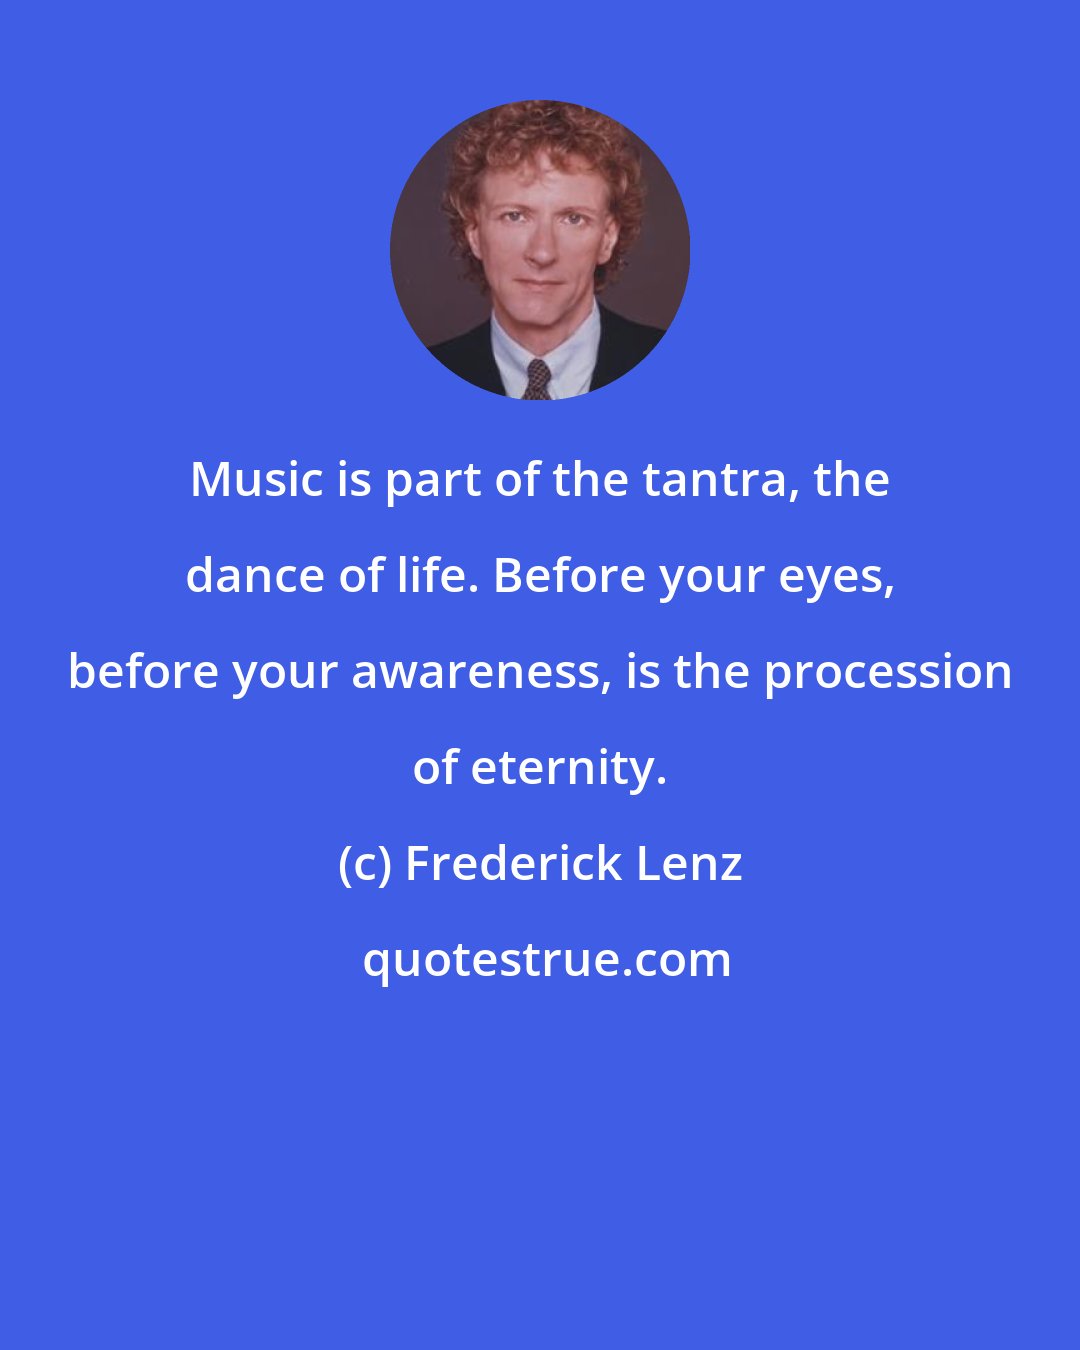 Frederick Lenz: Music is part of the tantra, the dance of life. Before your eyes, before your awareness, is the procession of eternity.